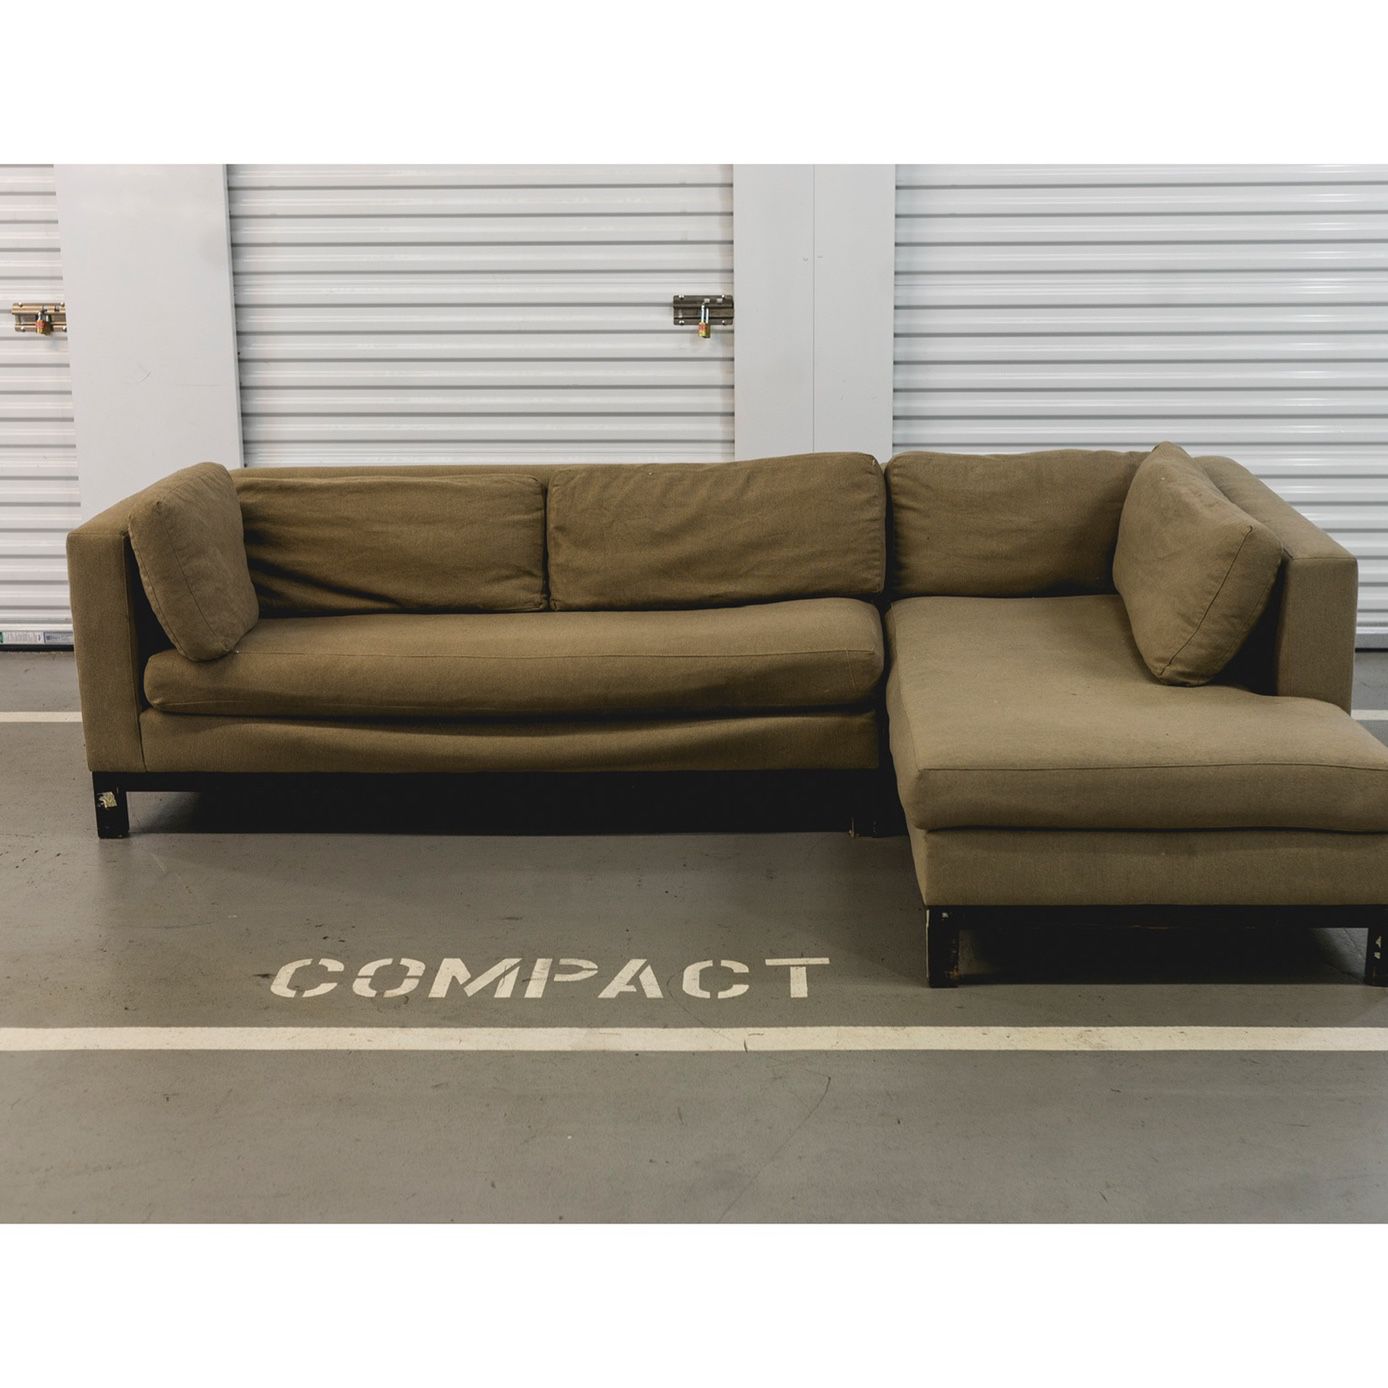 FREE DELIVERY Beige Crate & Barrel Sectional